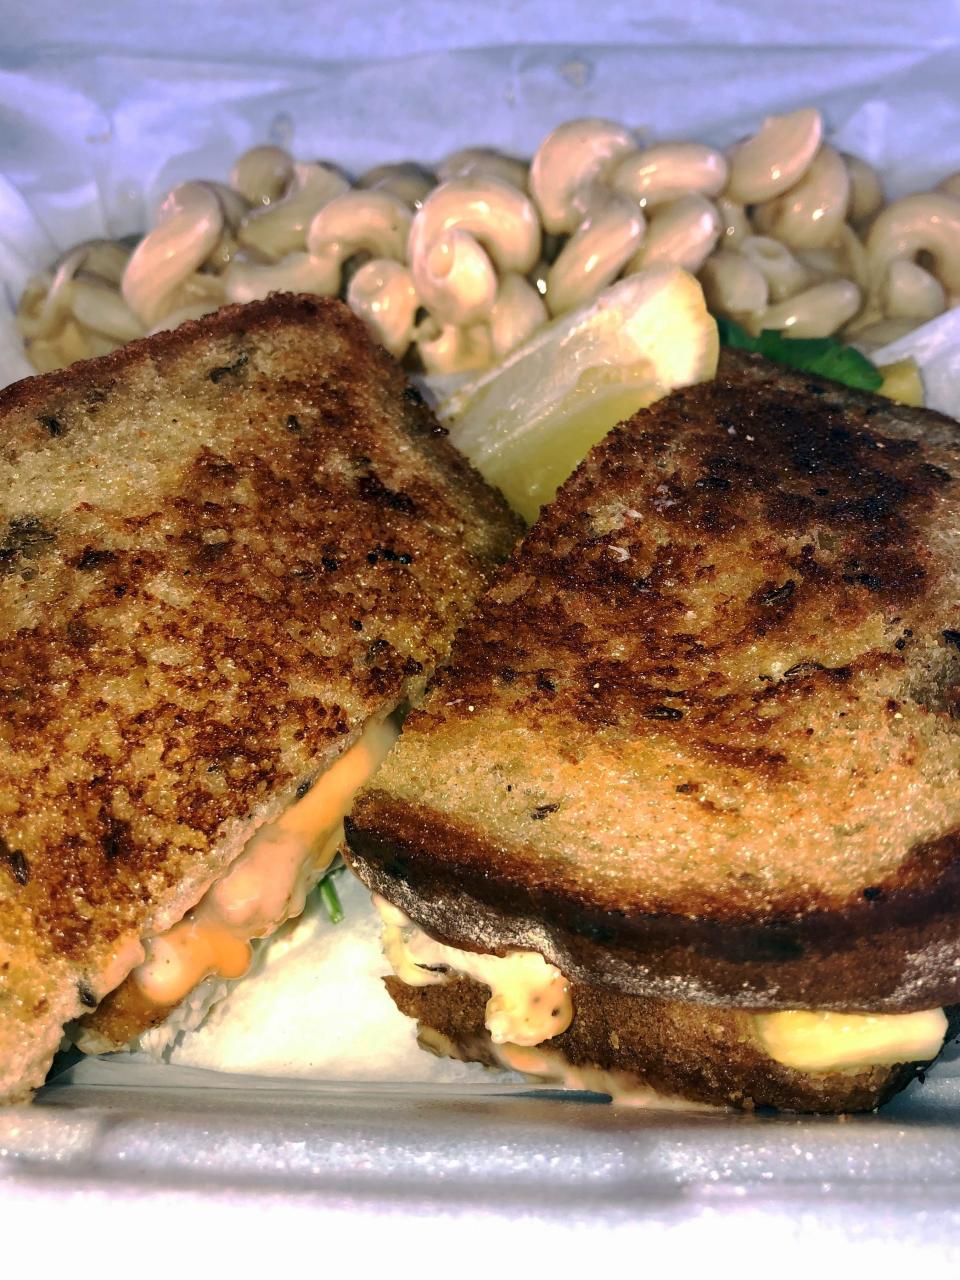 The Tropical Reuben at Horns, Fins & Feathers is among many weekly menu items that Chef Brian Waller has created since he and his mother, Kem Gibson, purchased the Zanesville-based food truck in 2021. It features fresh Lake Erie walleye, swiss cheese, housemade Russian dressing, pineapple slaw and fresh clilantro on marble rye bread.